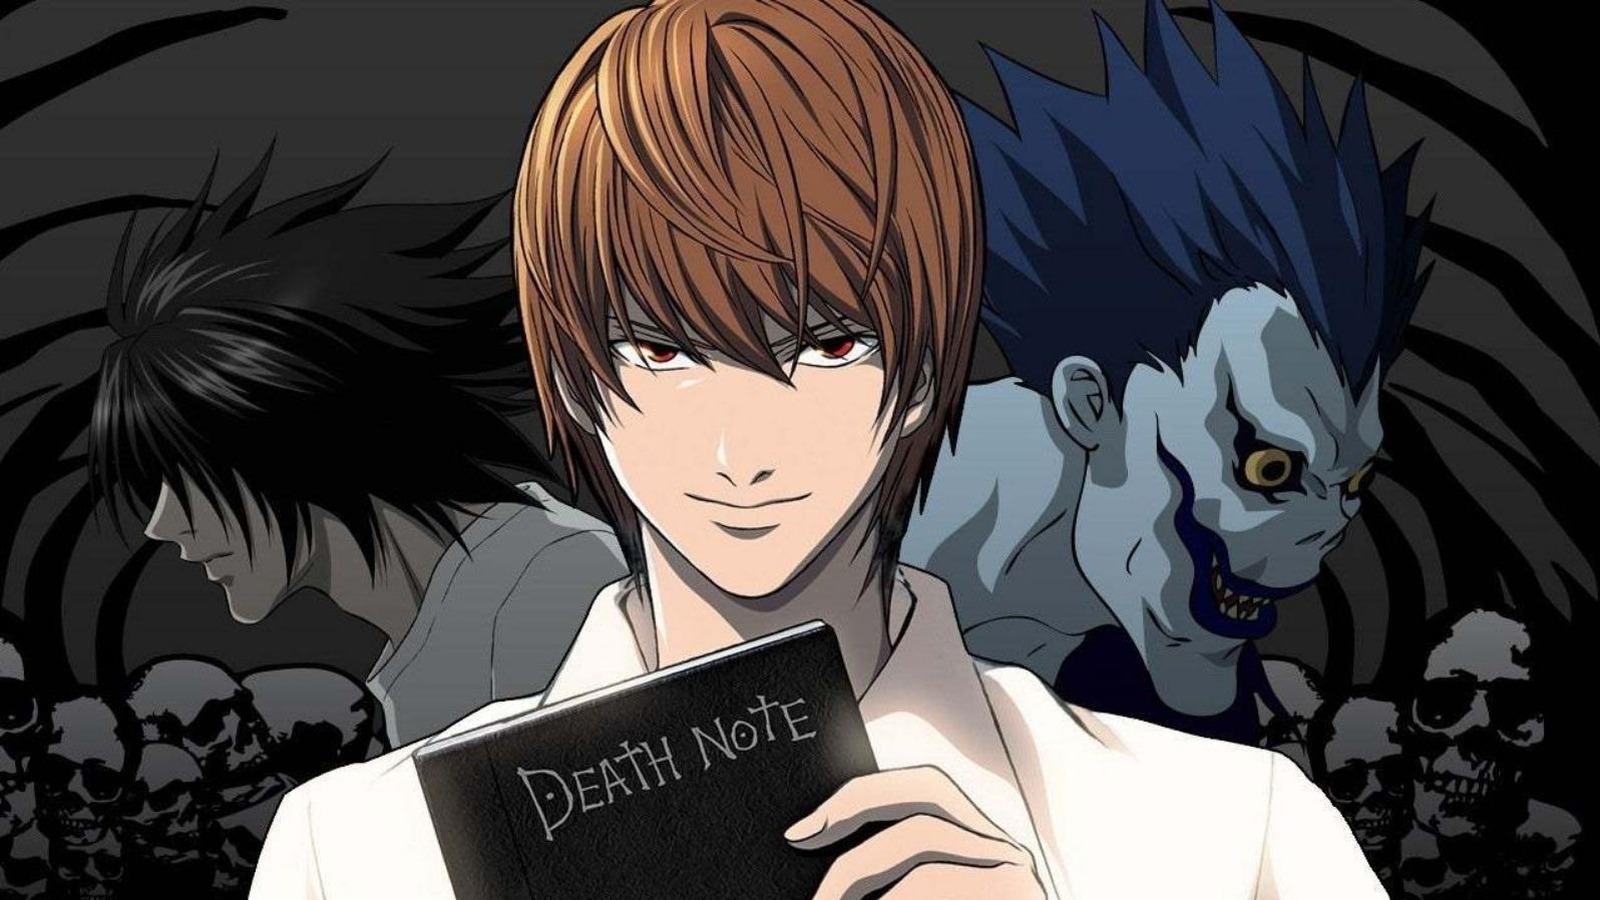 Death Note Anime Notebook Set With Music CD Feather Pen Leather Journal  Collectable Death Note Notebook